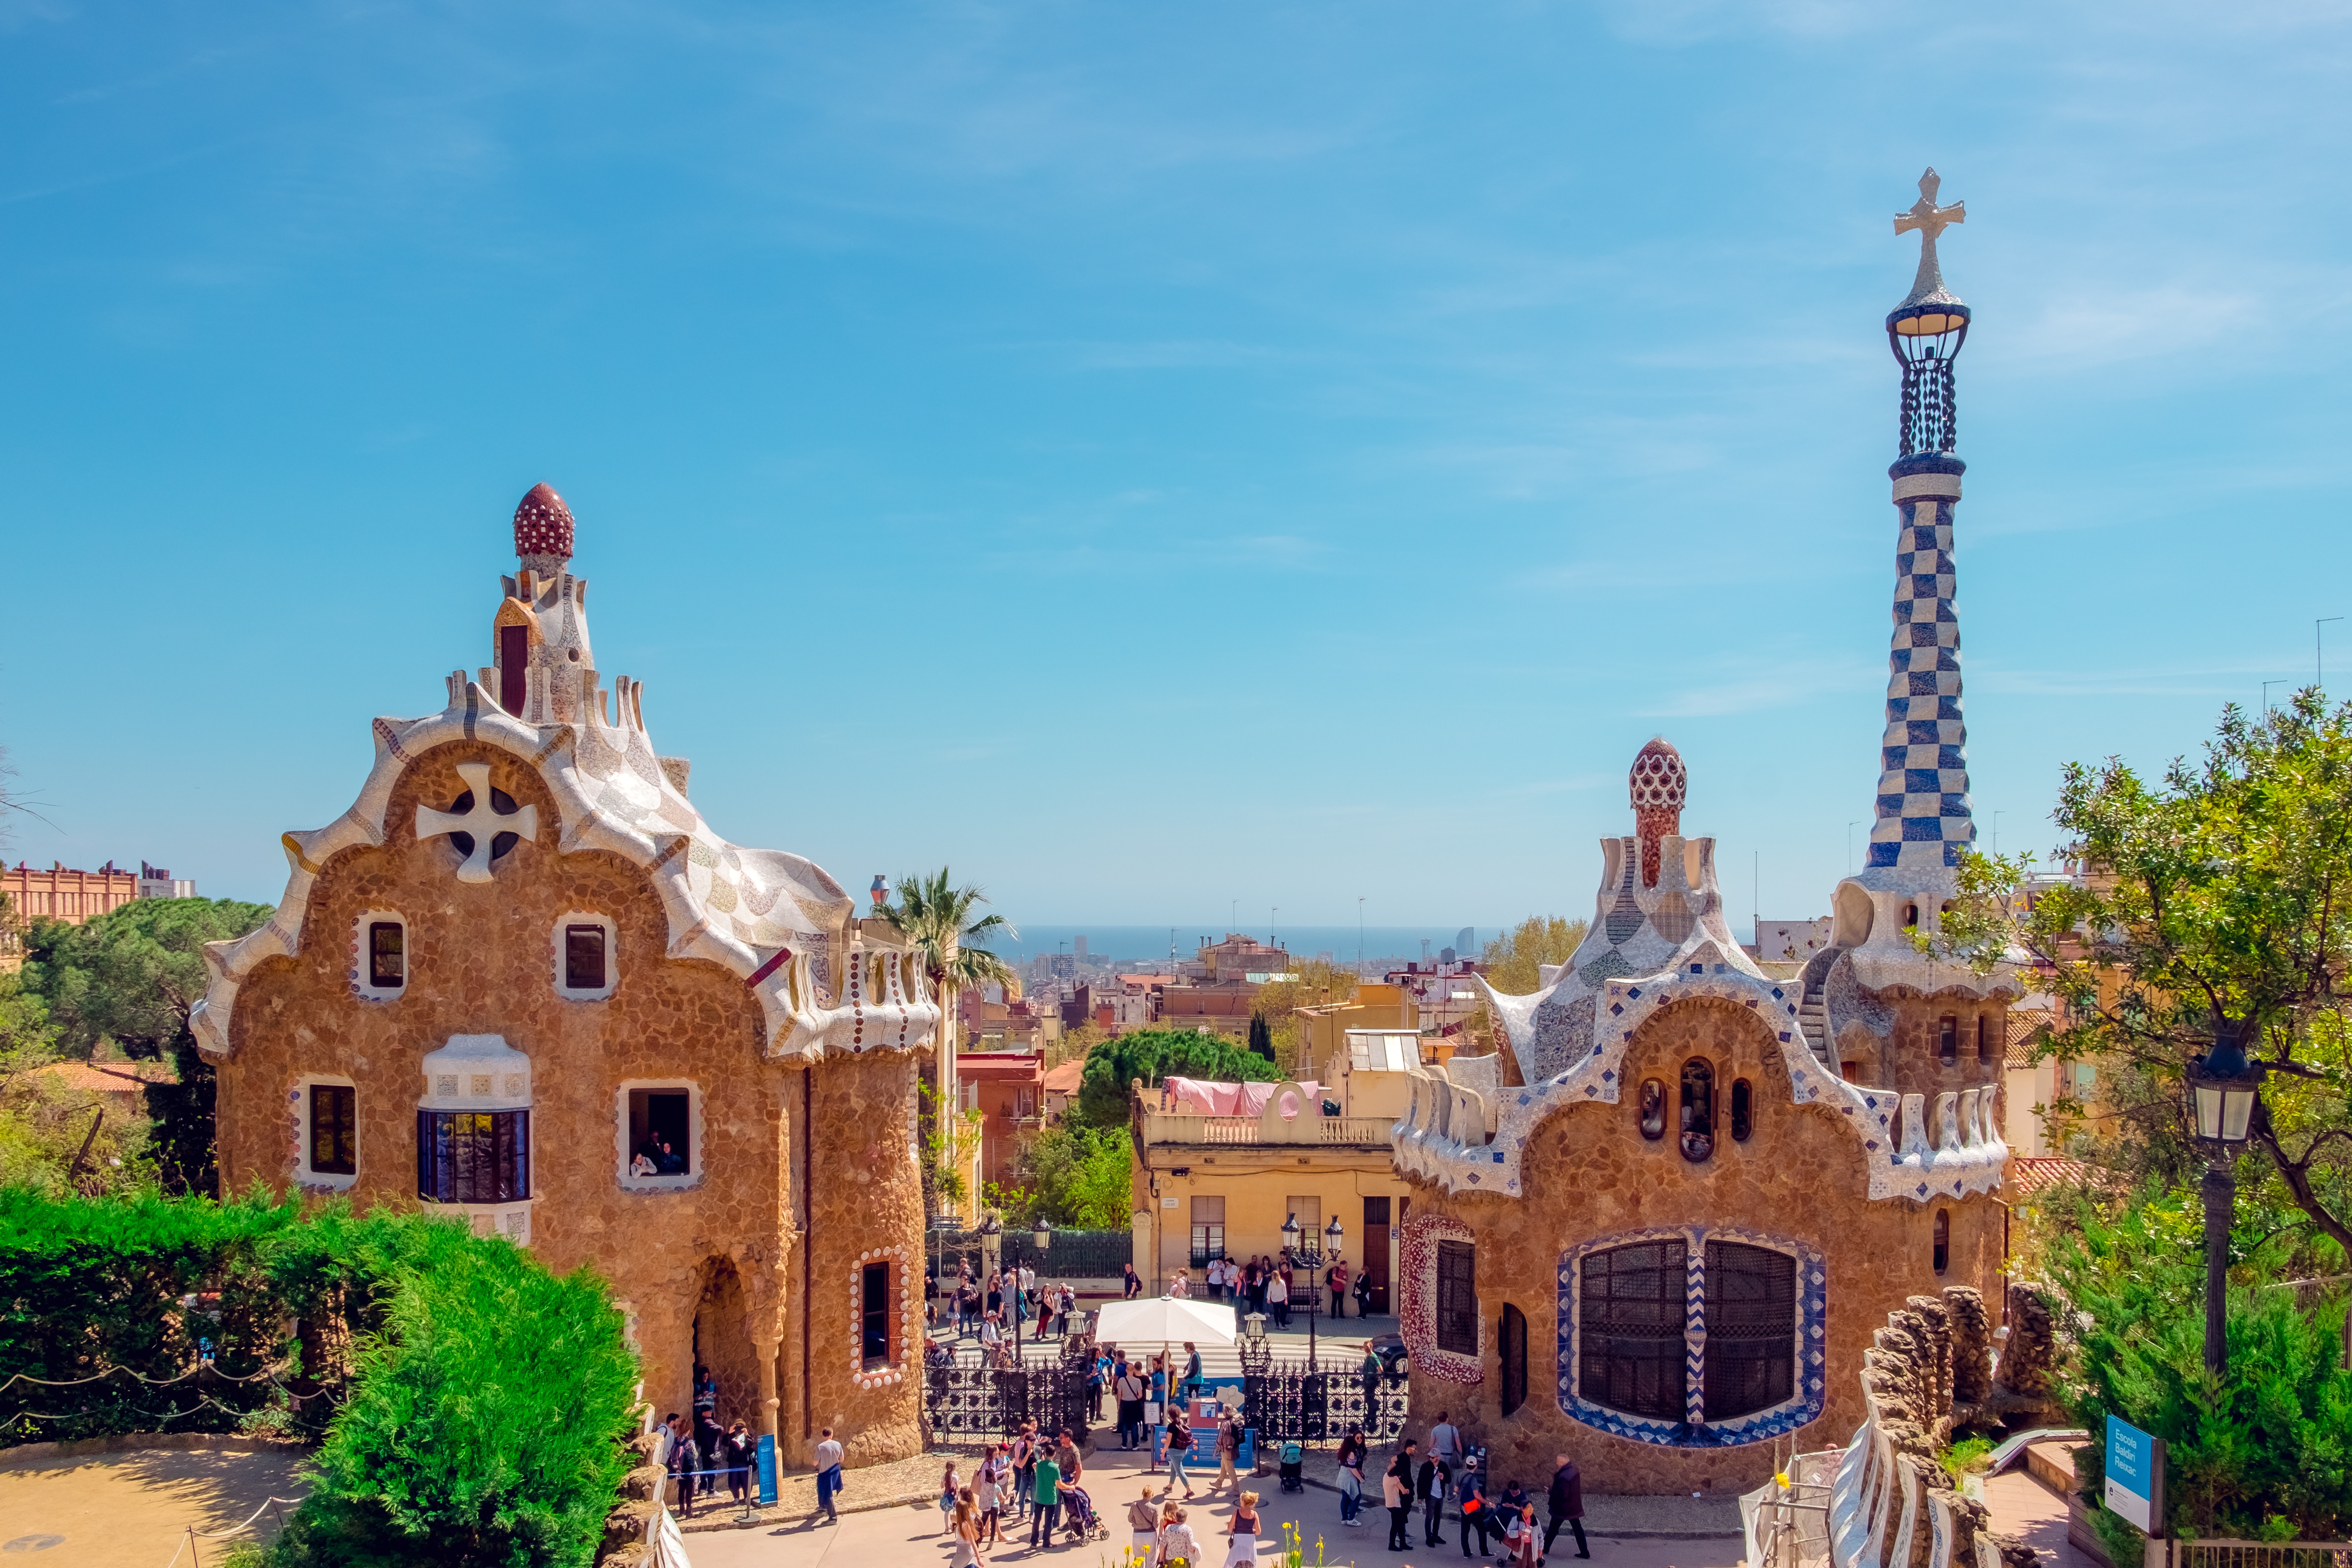 Park Guell by Antoni Gaudi